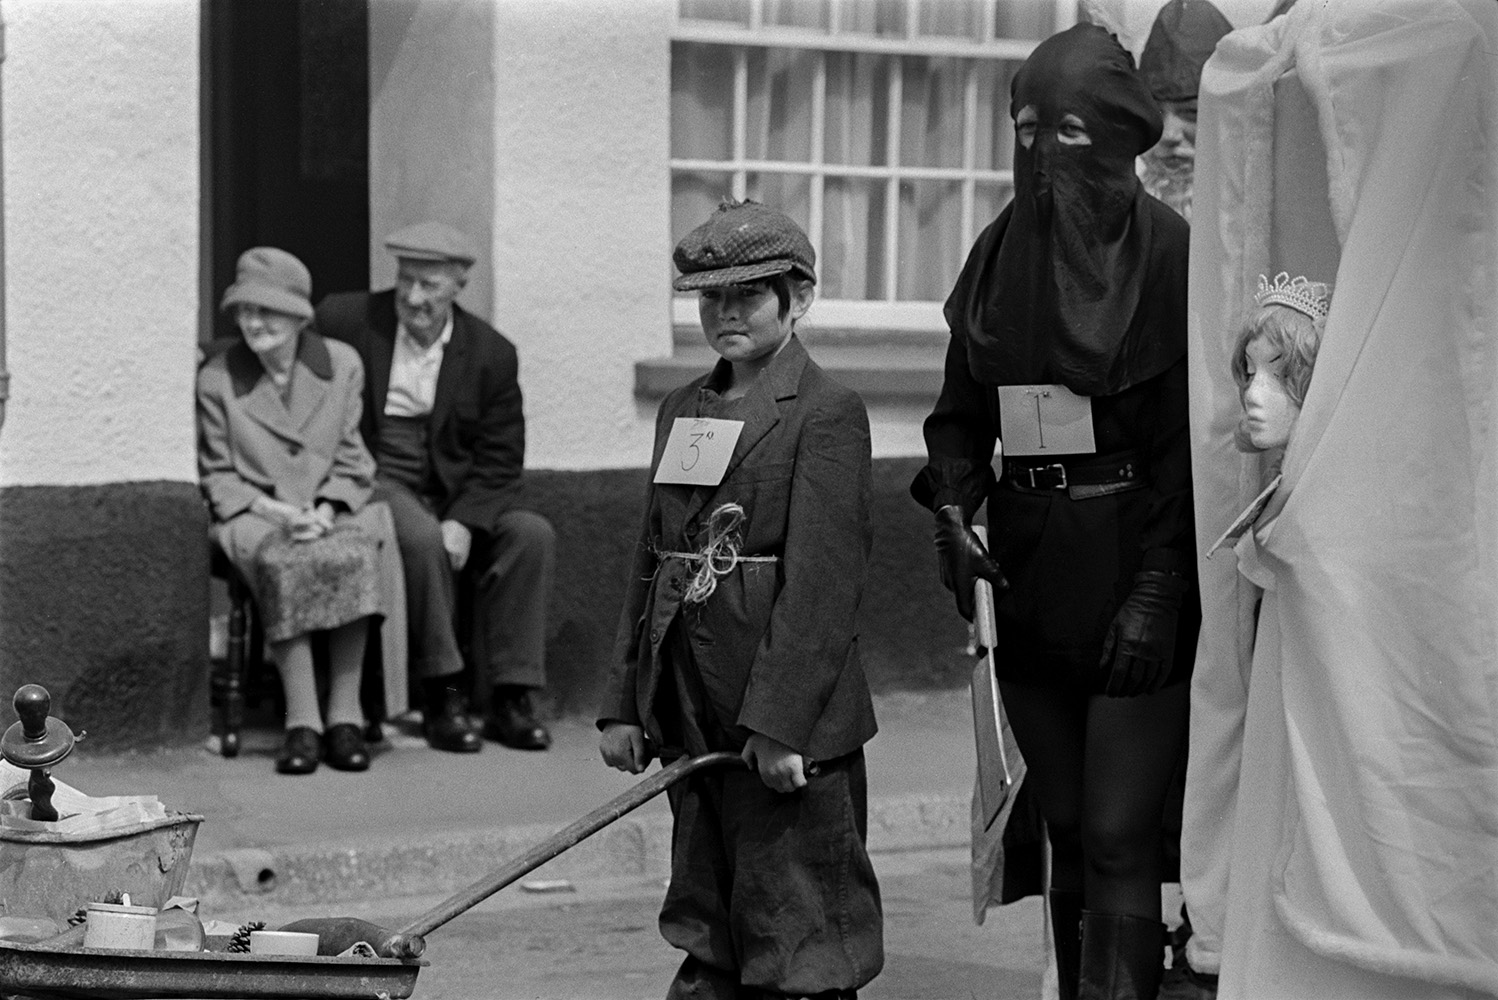 A man and woman sat in their doorway watching children in fancy dress parading through the street at Chulmleigh Fair. One child is dressed as an executioner.